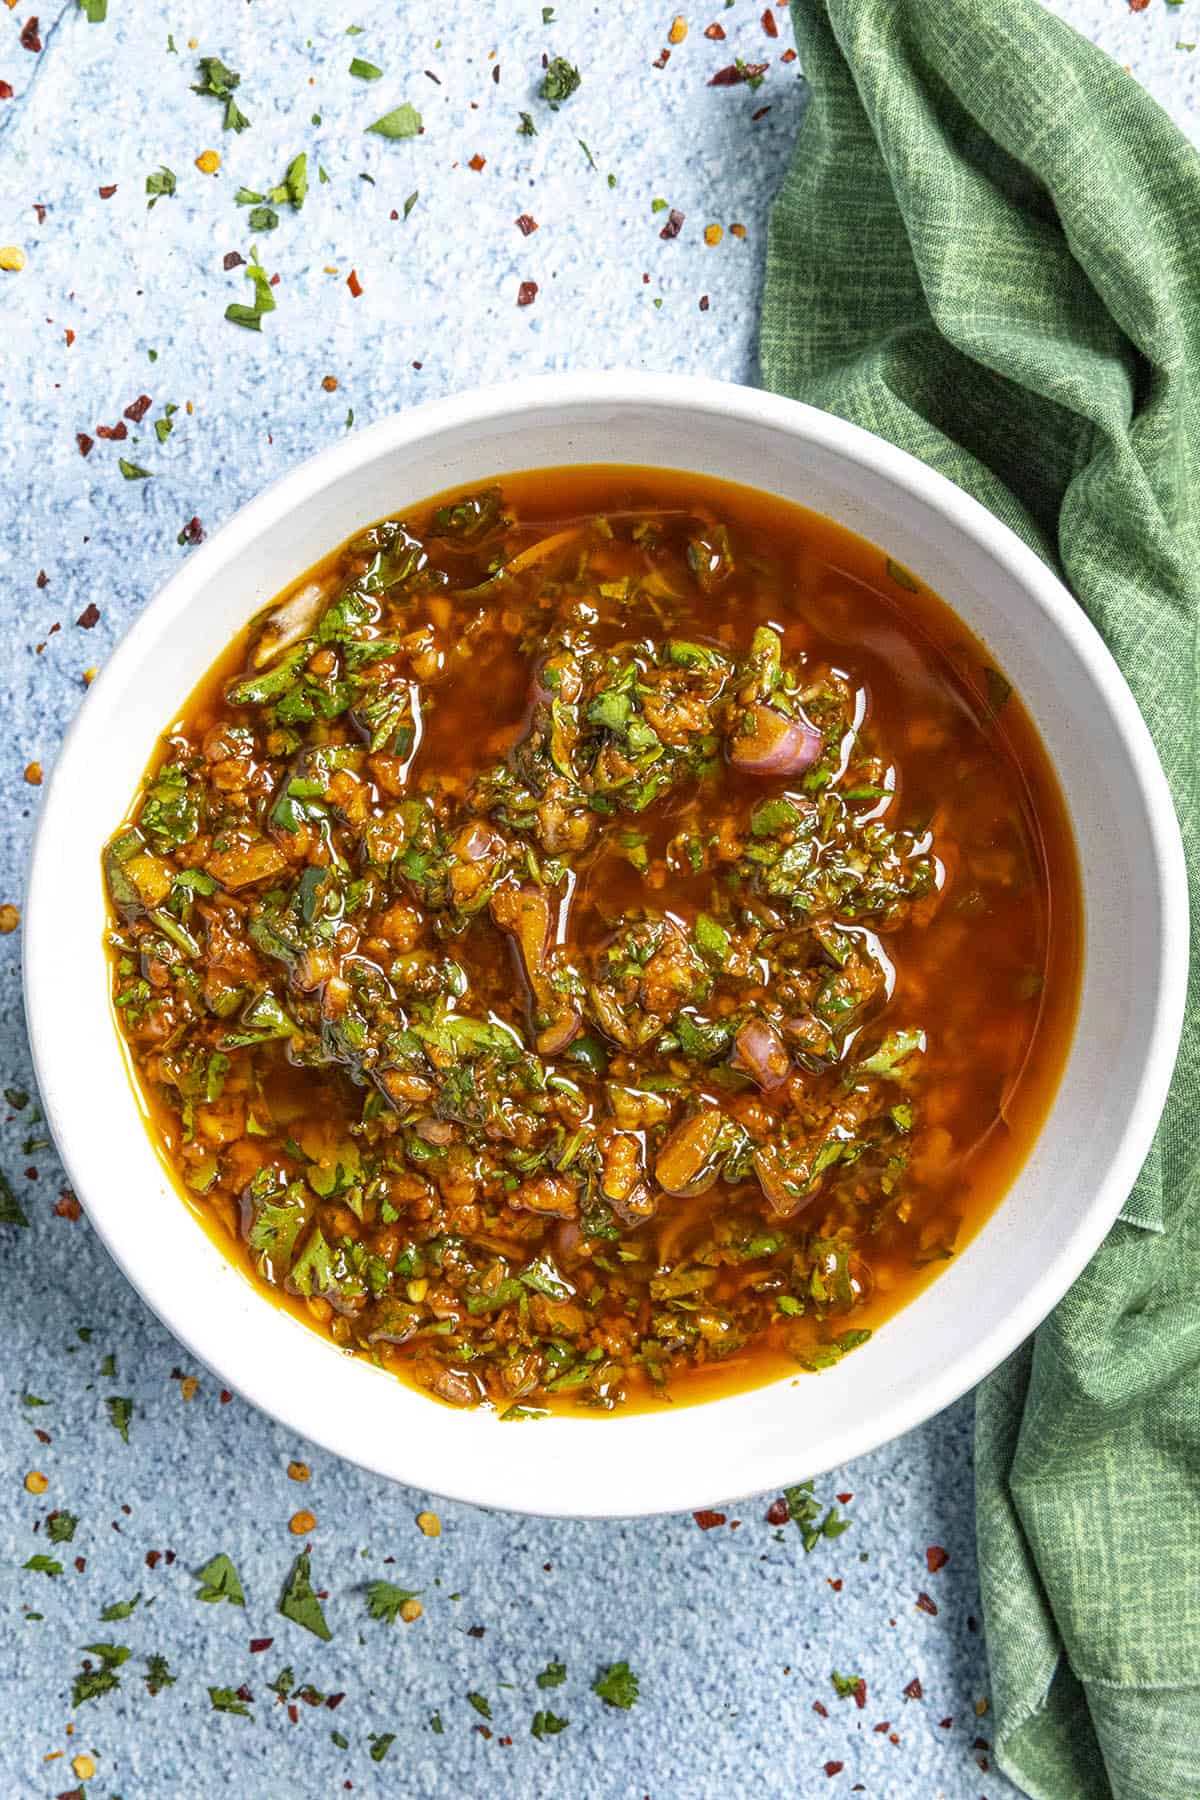 Chermoula sauce in a bowl, ready to serve